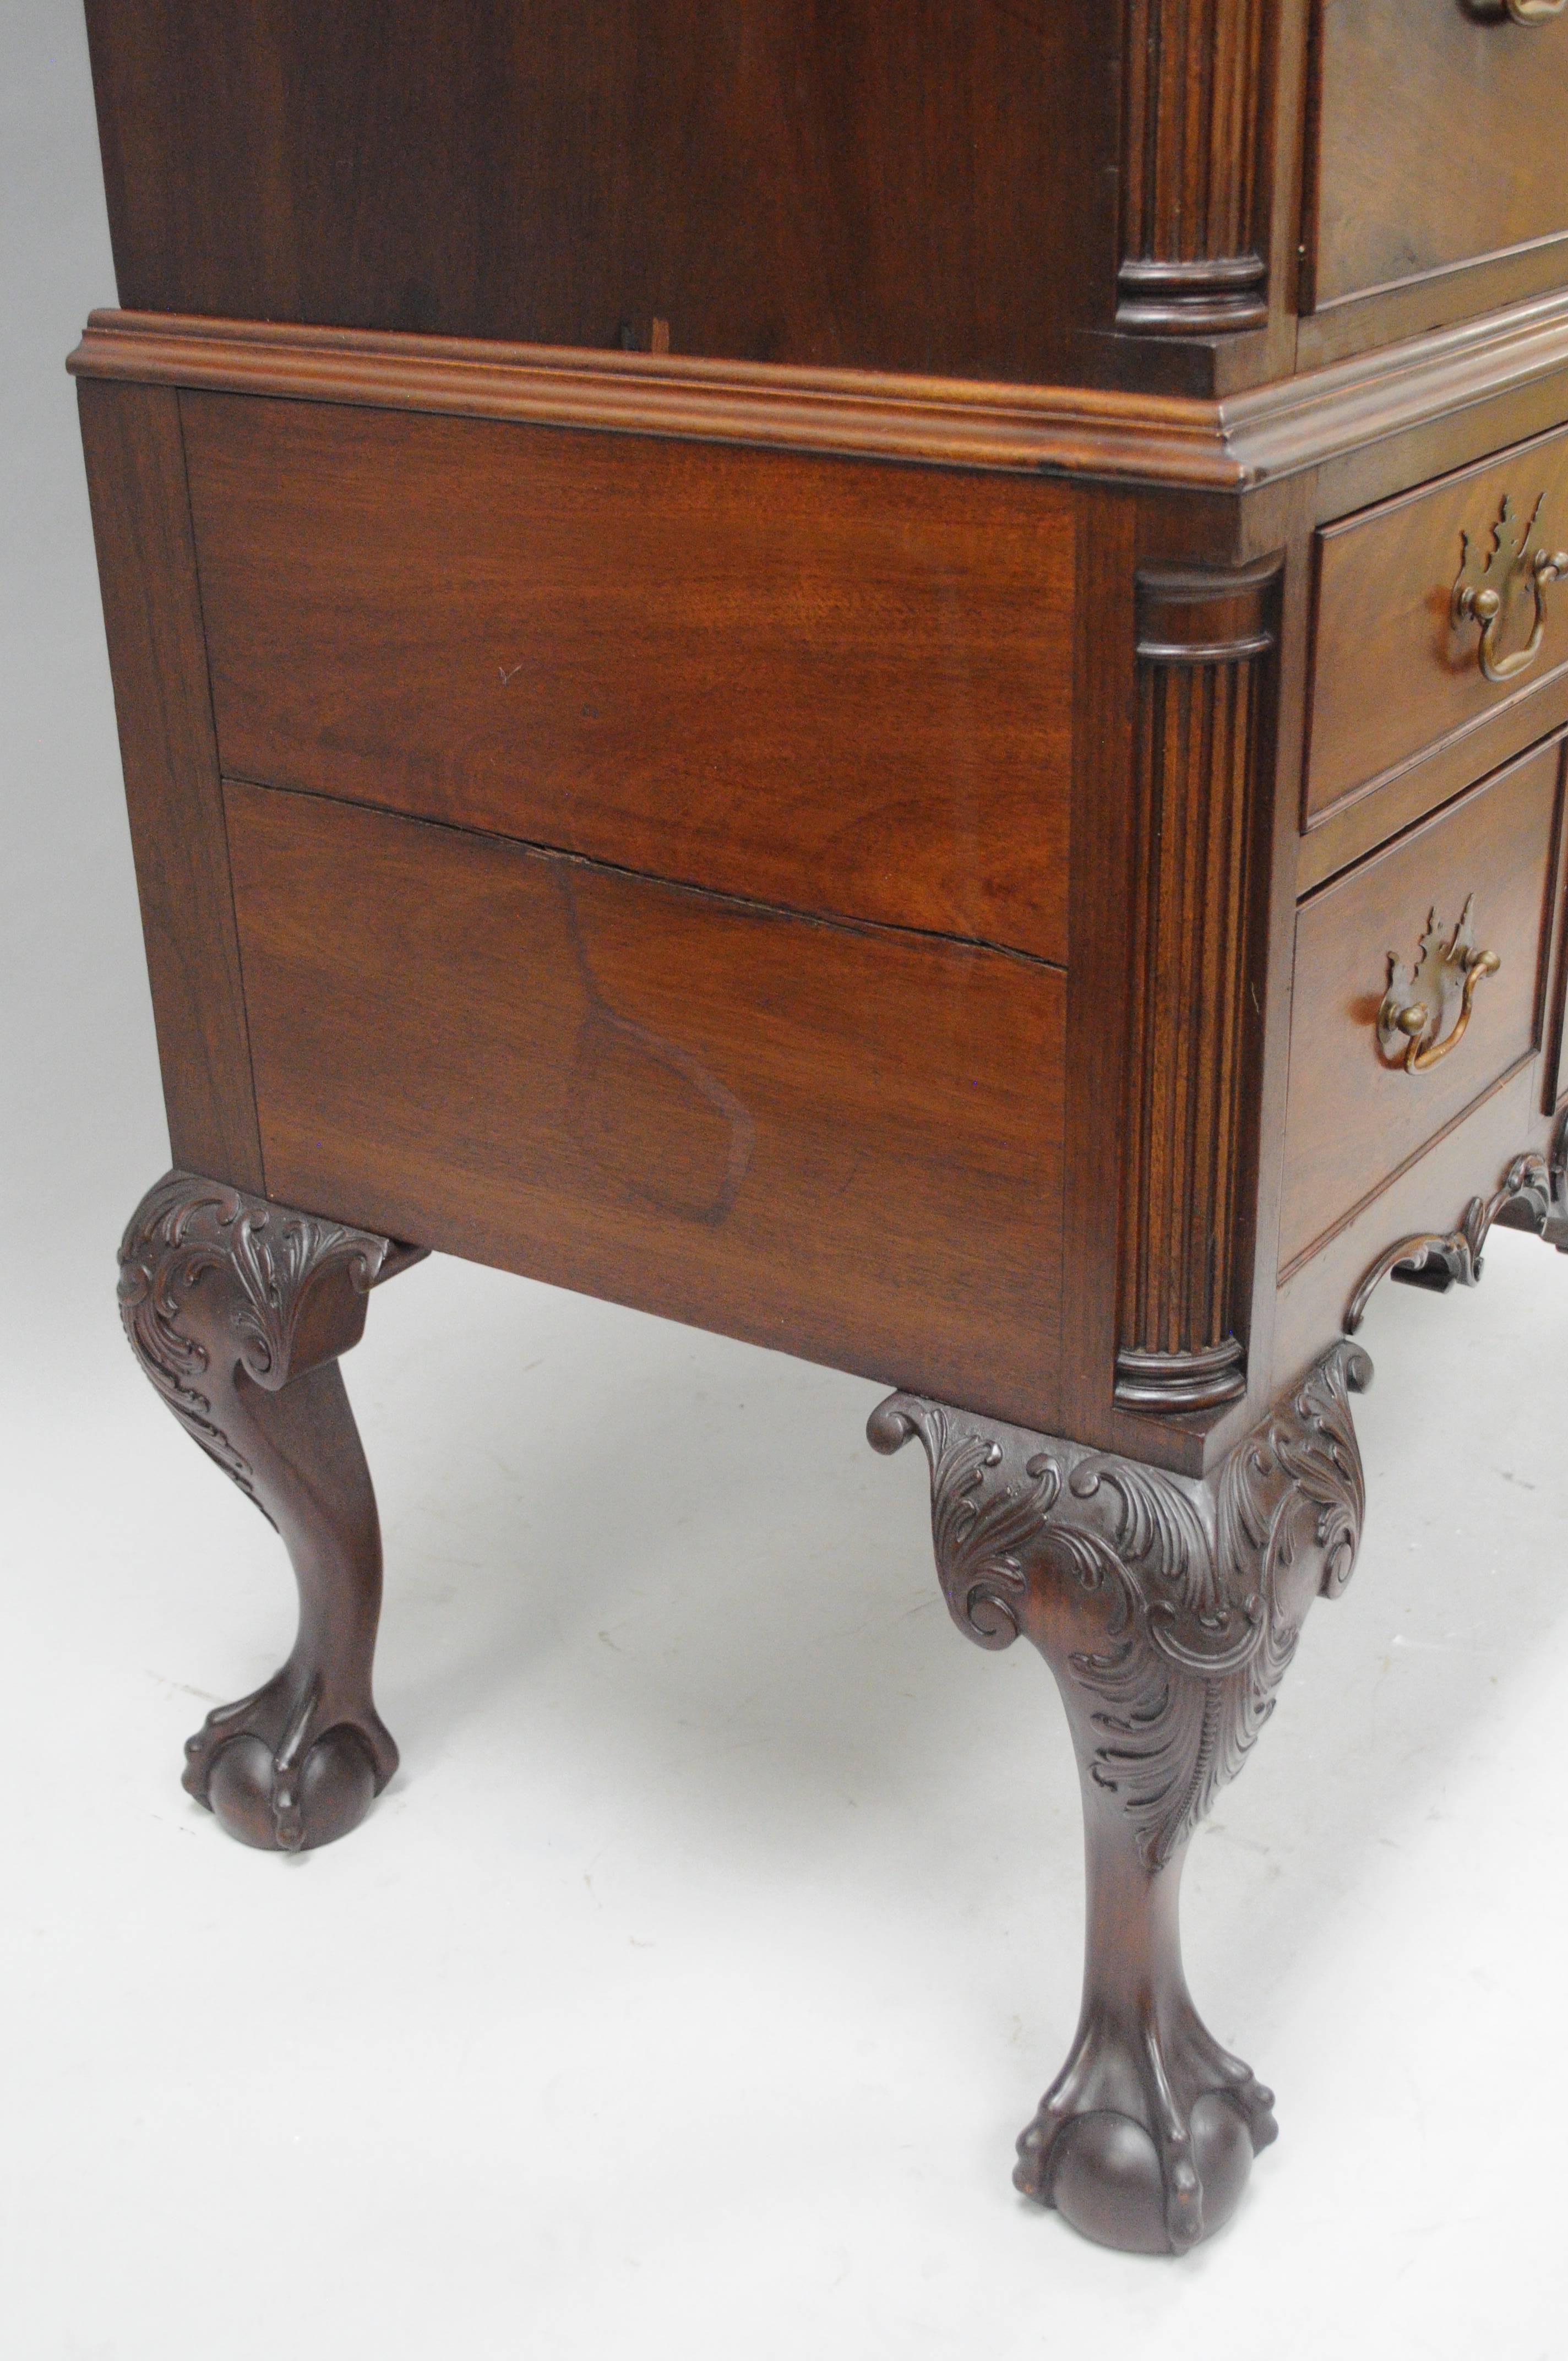 Carved 19th C. Crotch Mahogany Chippendale Ball and Claw Highboy Tall Chest of Drawers For Sale